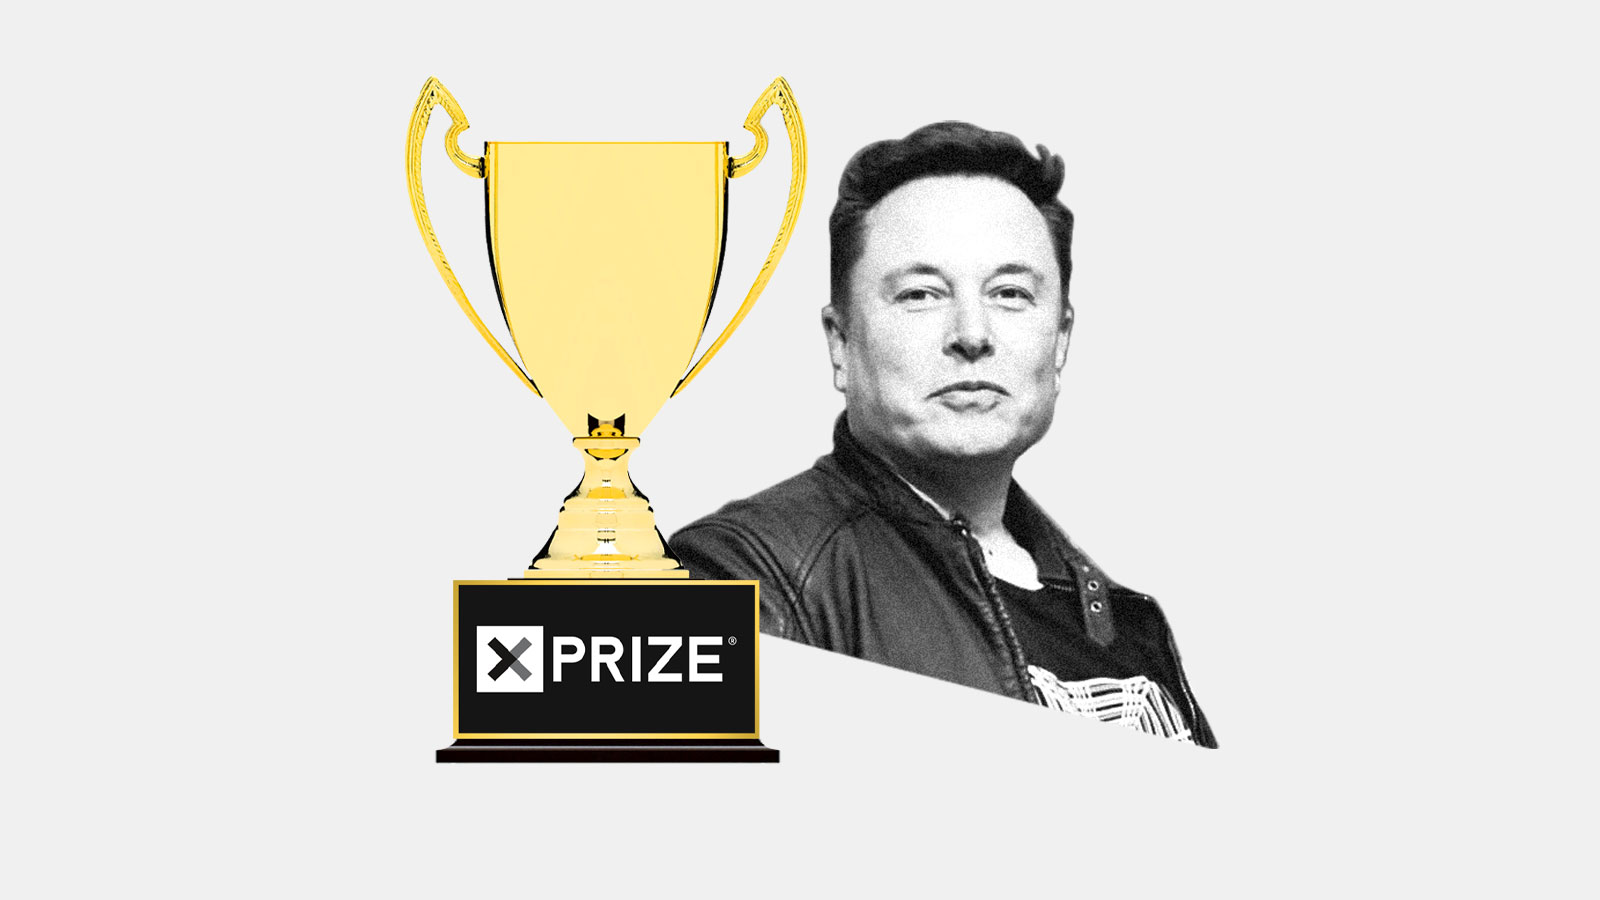 Collage of Elon Musk next to a trophy with the XPRIZE logo on the base